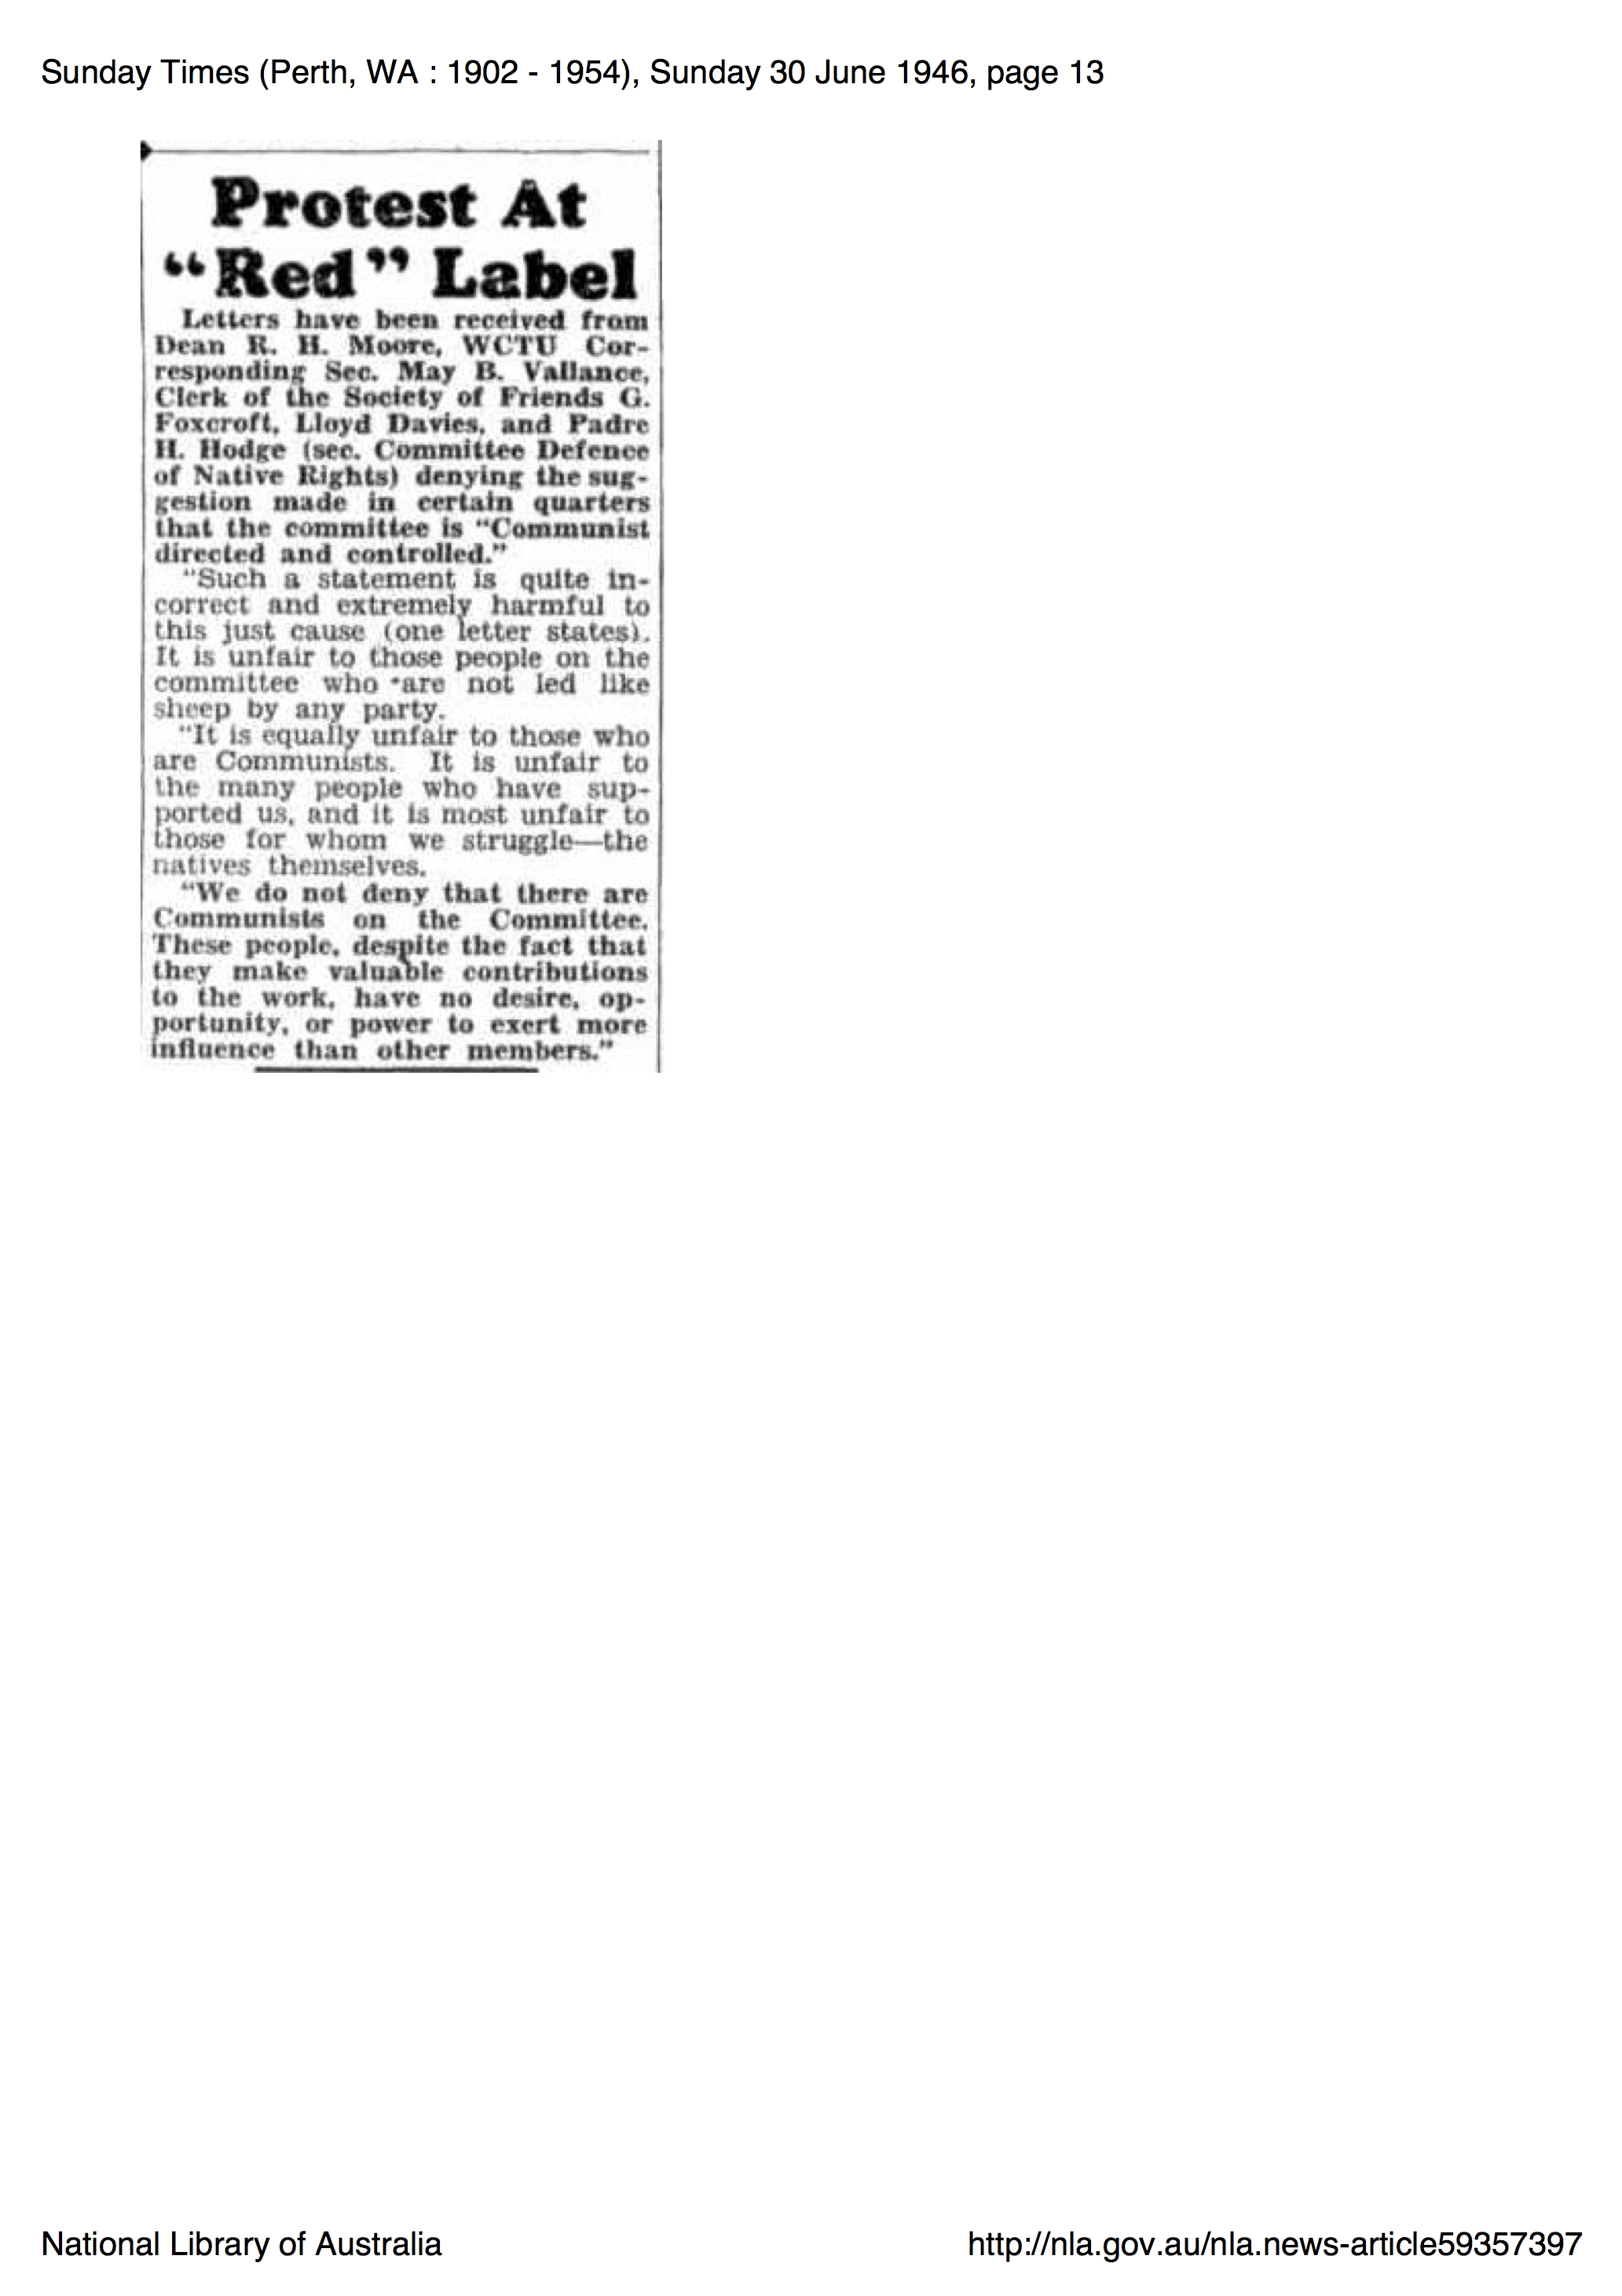 Sunday Times, 13 June 1946, p. 13, ‘Protest at “Red” Label’